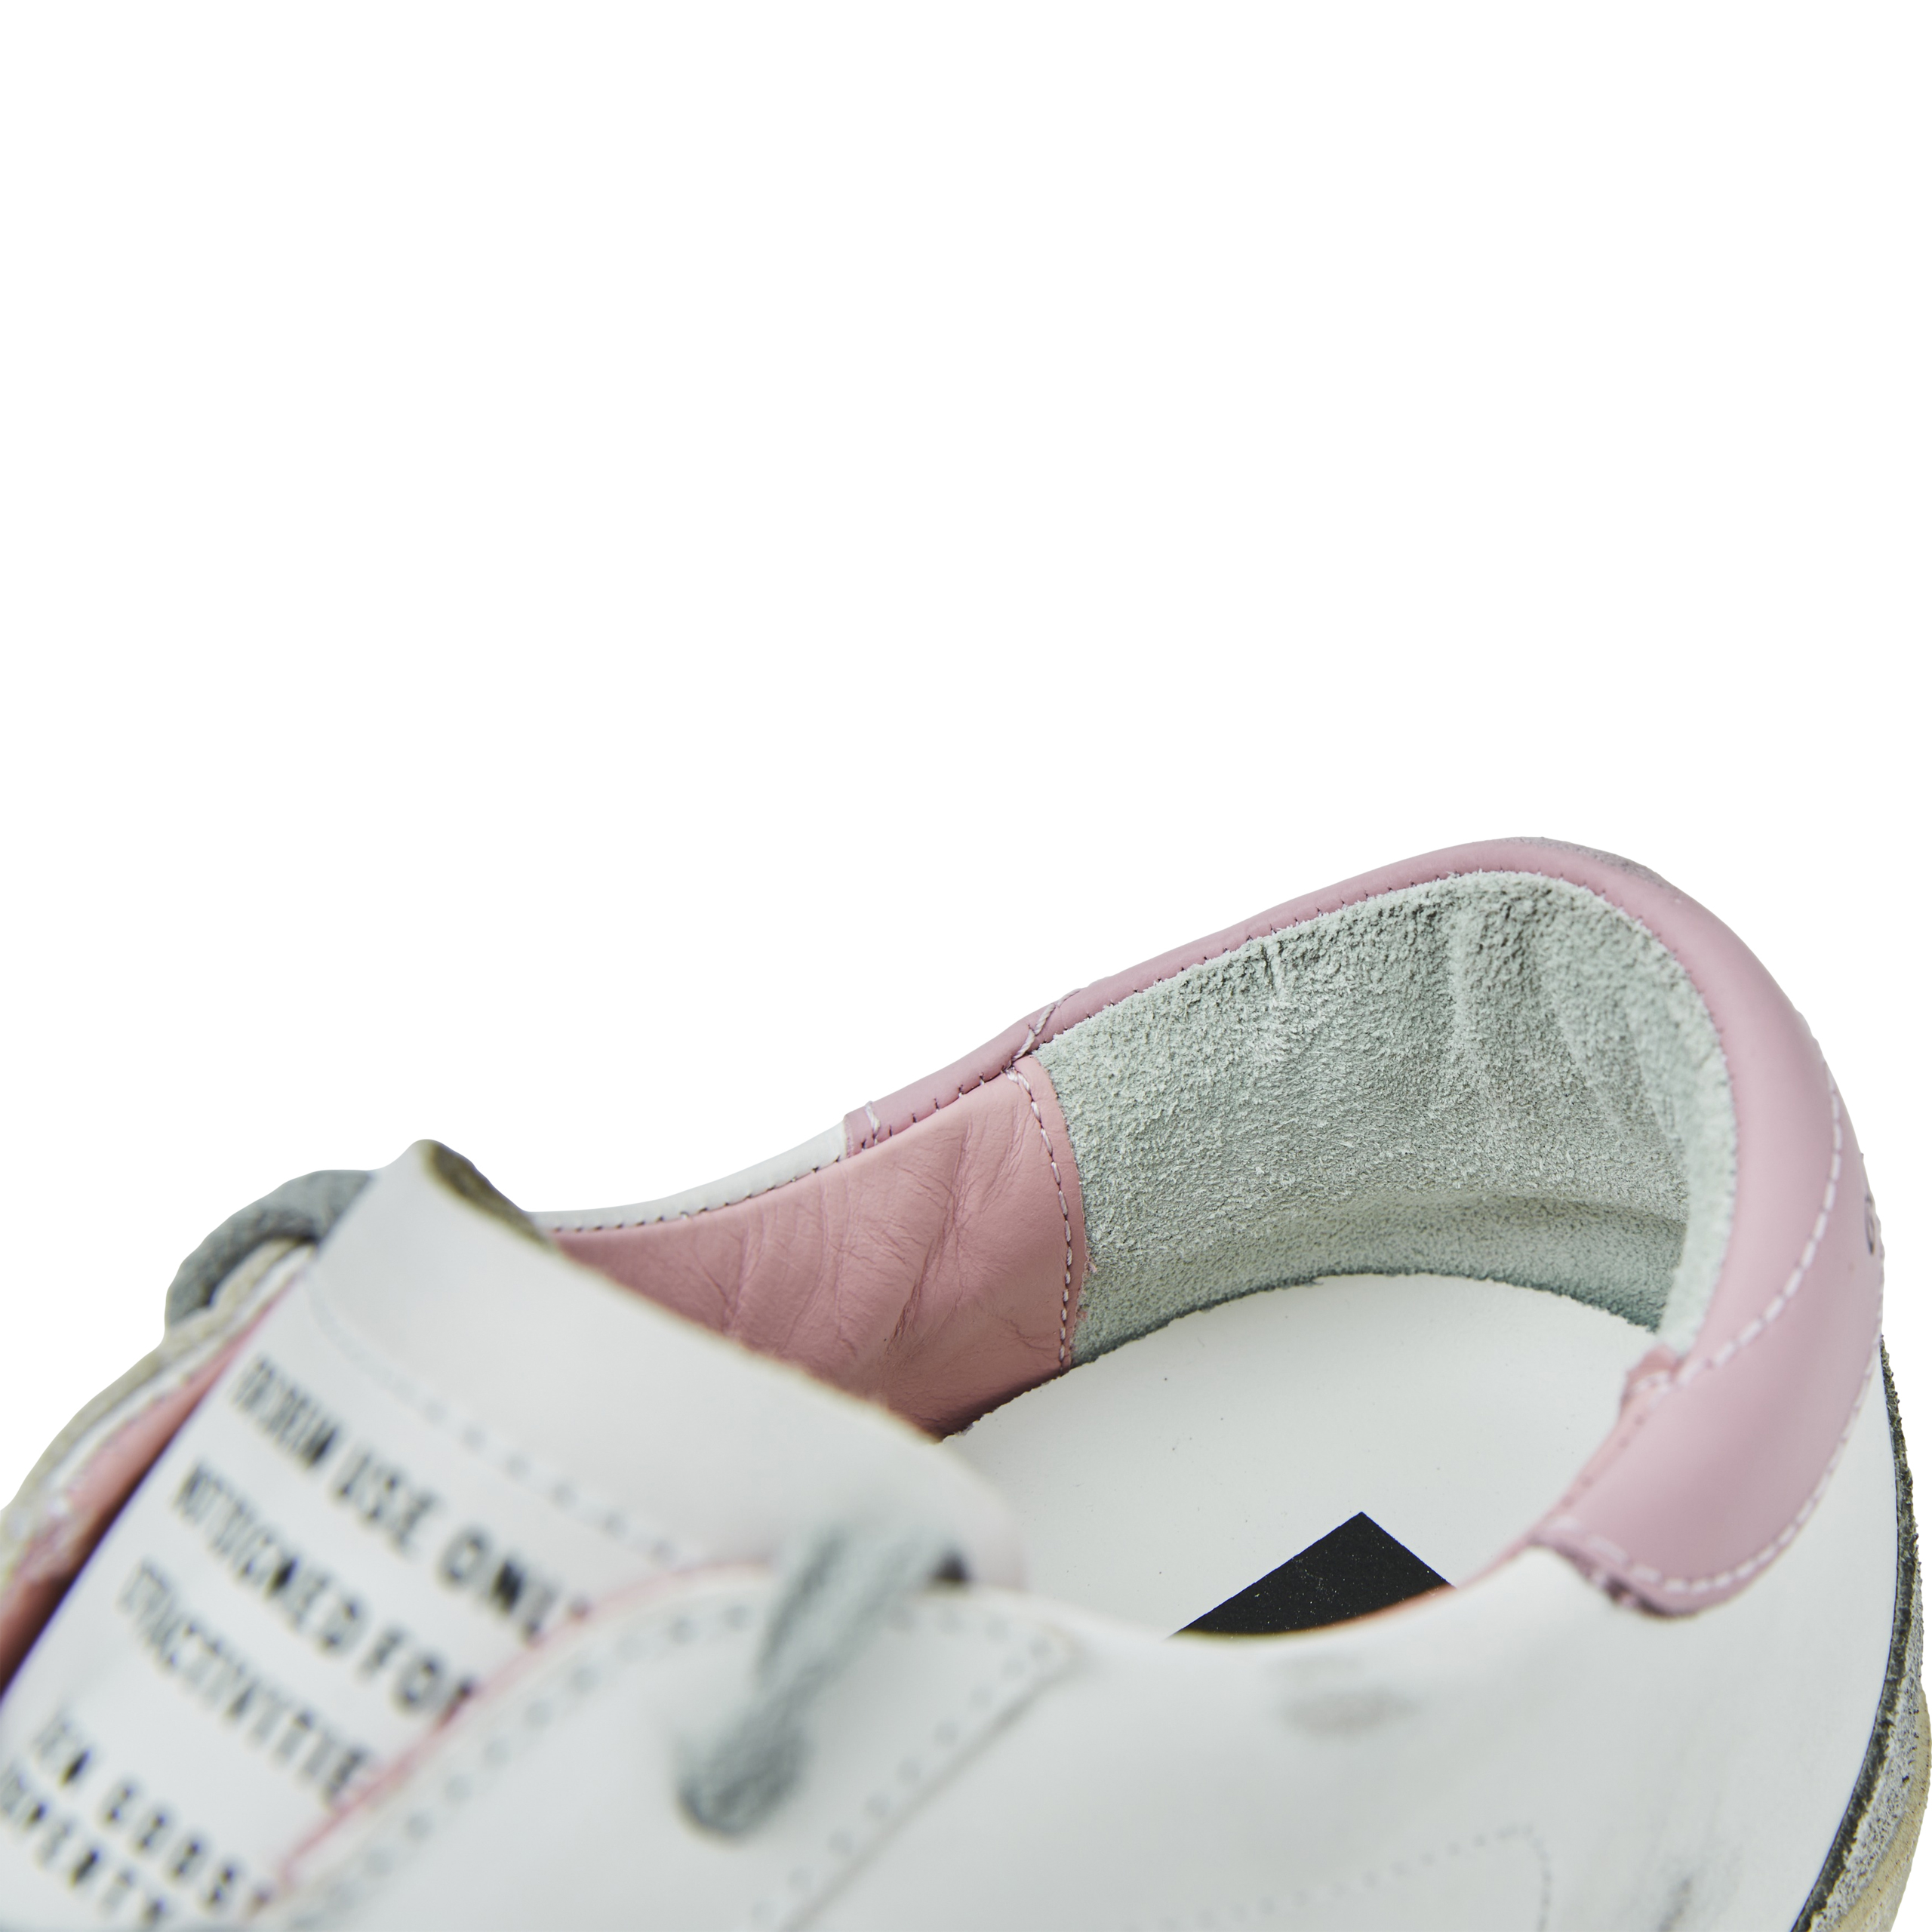 None Golden Goose Deluxe Brand GWF00102/F002569/10914, размер 38;41 GWF00102/F002569/10914 - фото 7